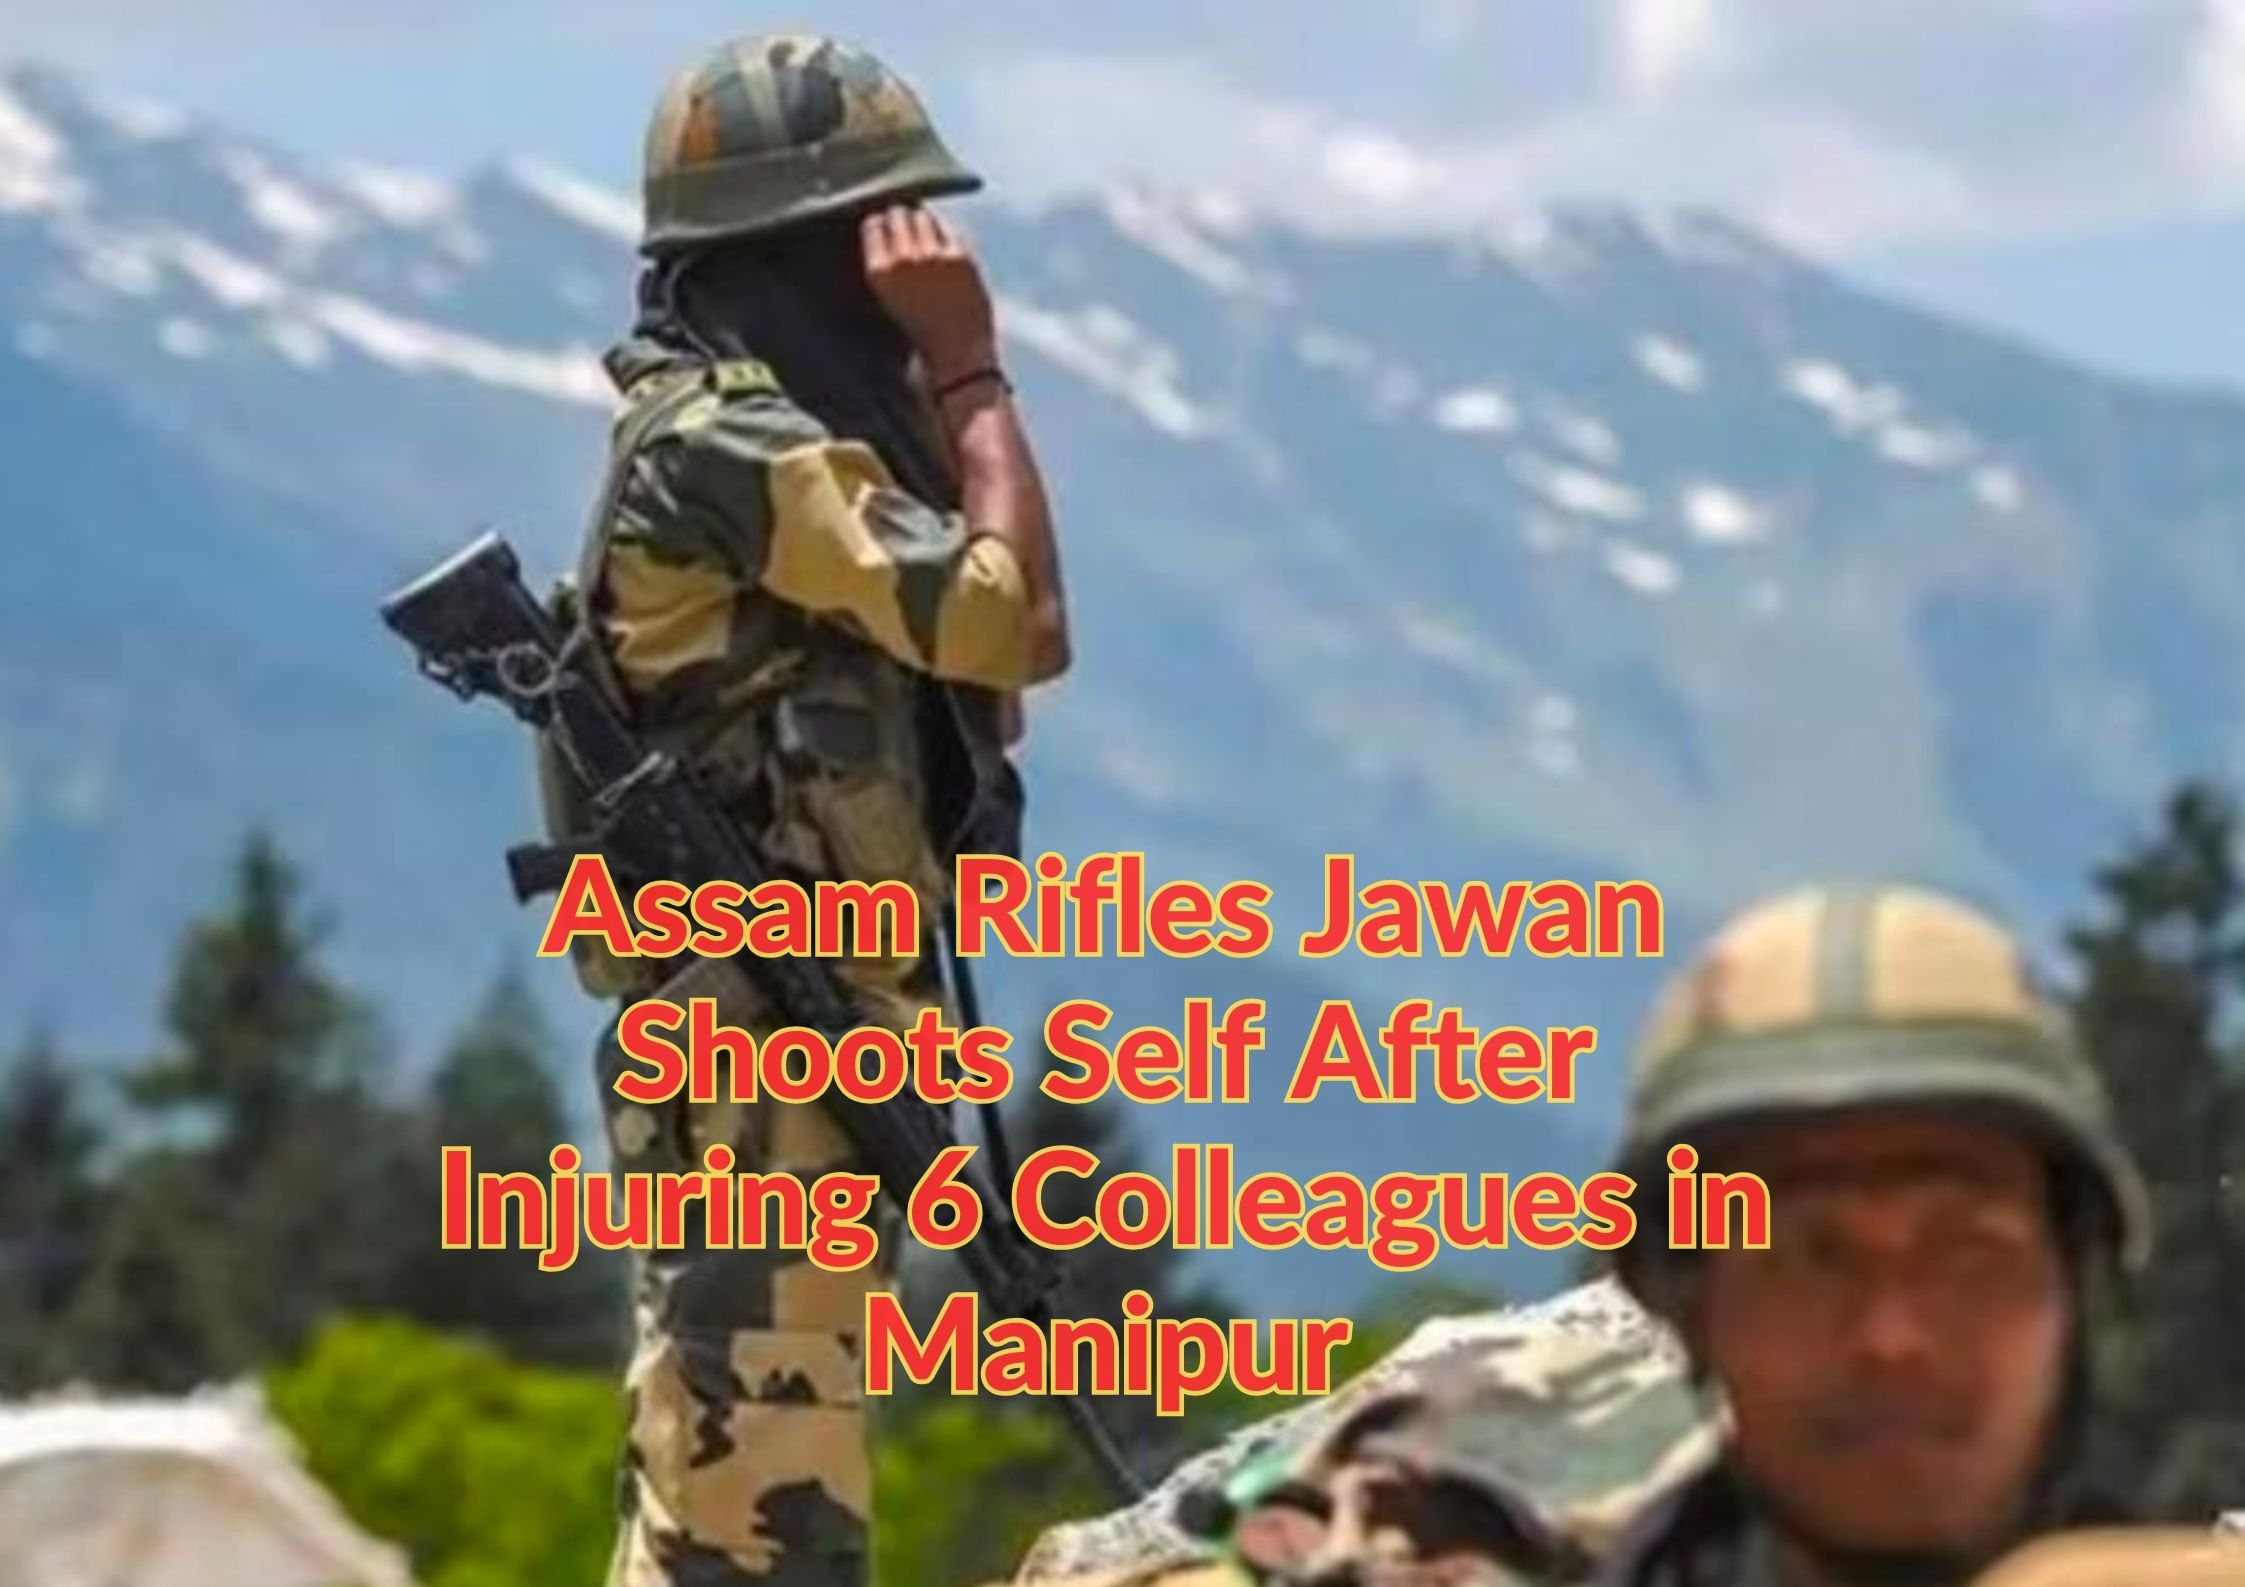 Assam Rifles Jawan Shoots Self After Injuring 6 Colleagues in Manipur